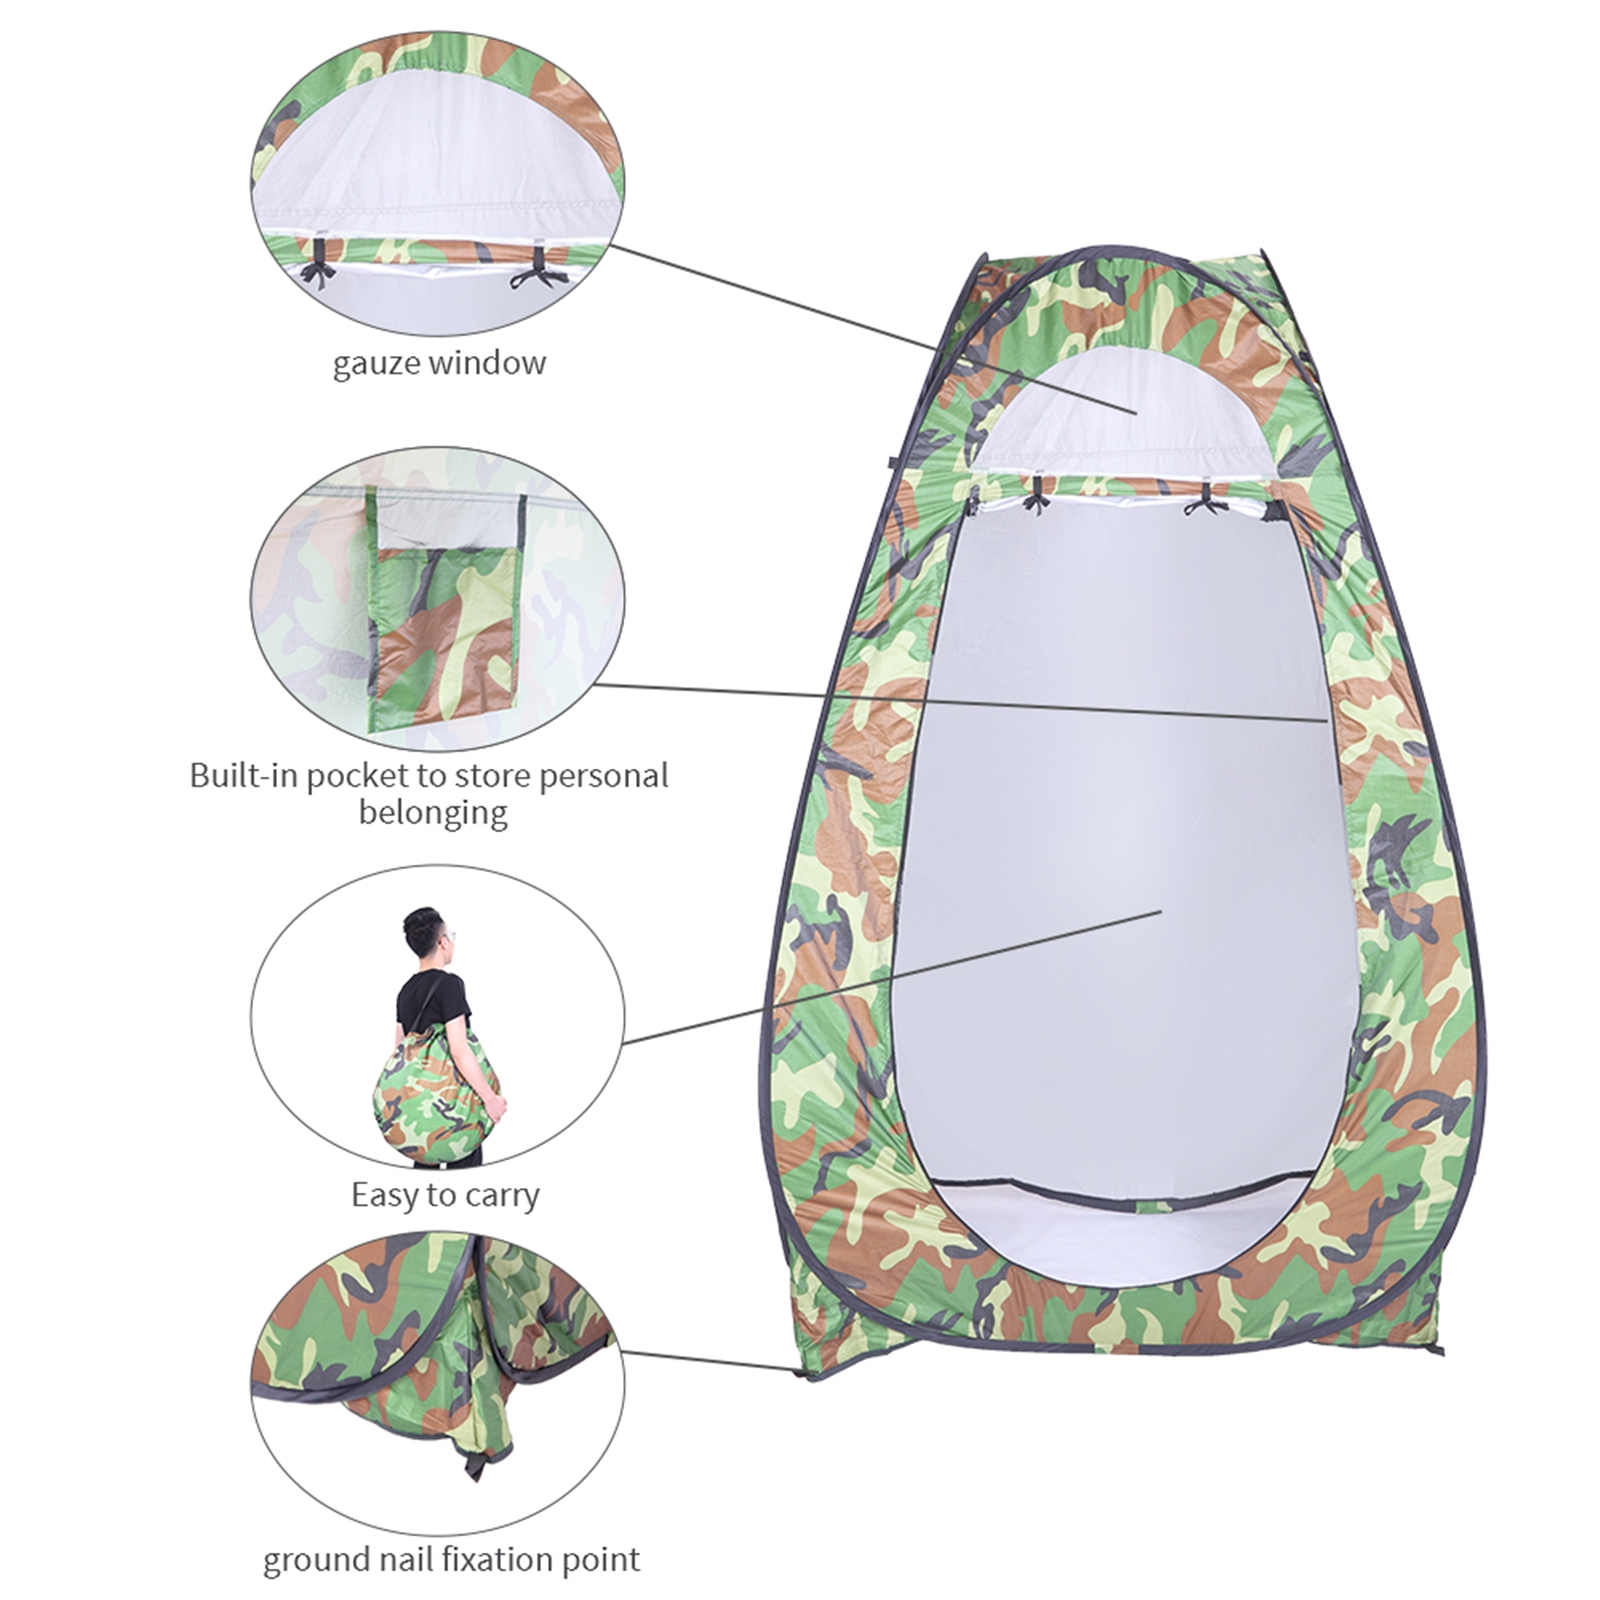 Portable Privacy Tent, Pop-Up Dressing Room Camping Shower Tent for Camping Picnic, Camouflage - image 4 of 7